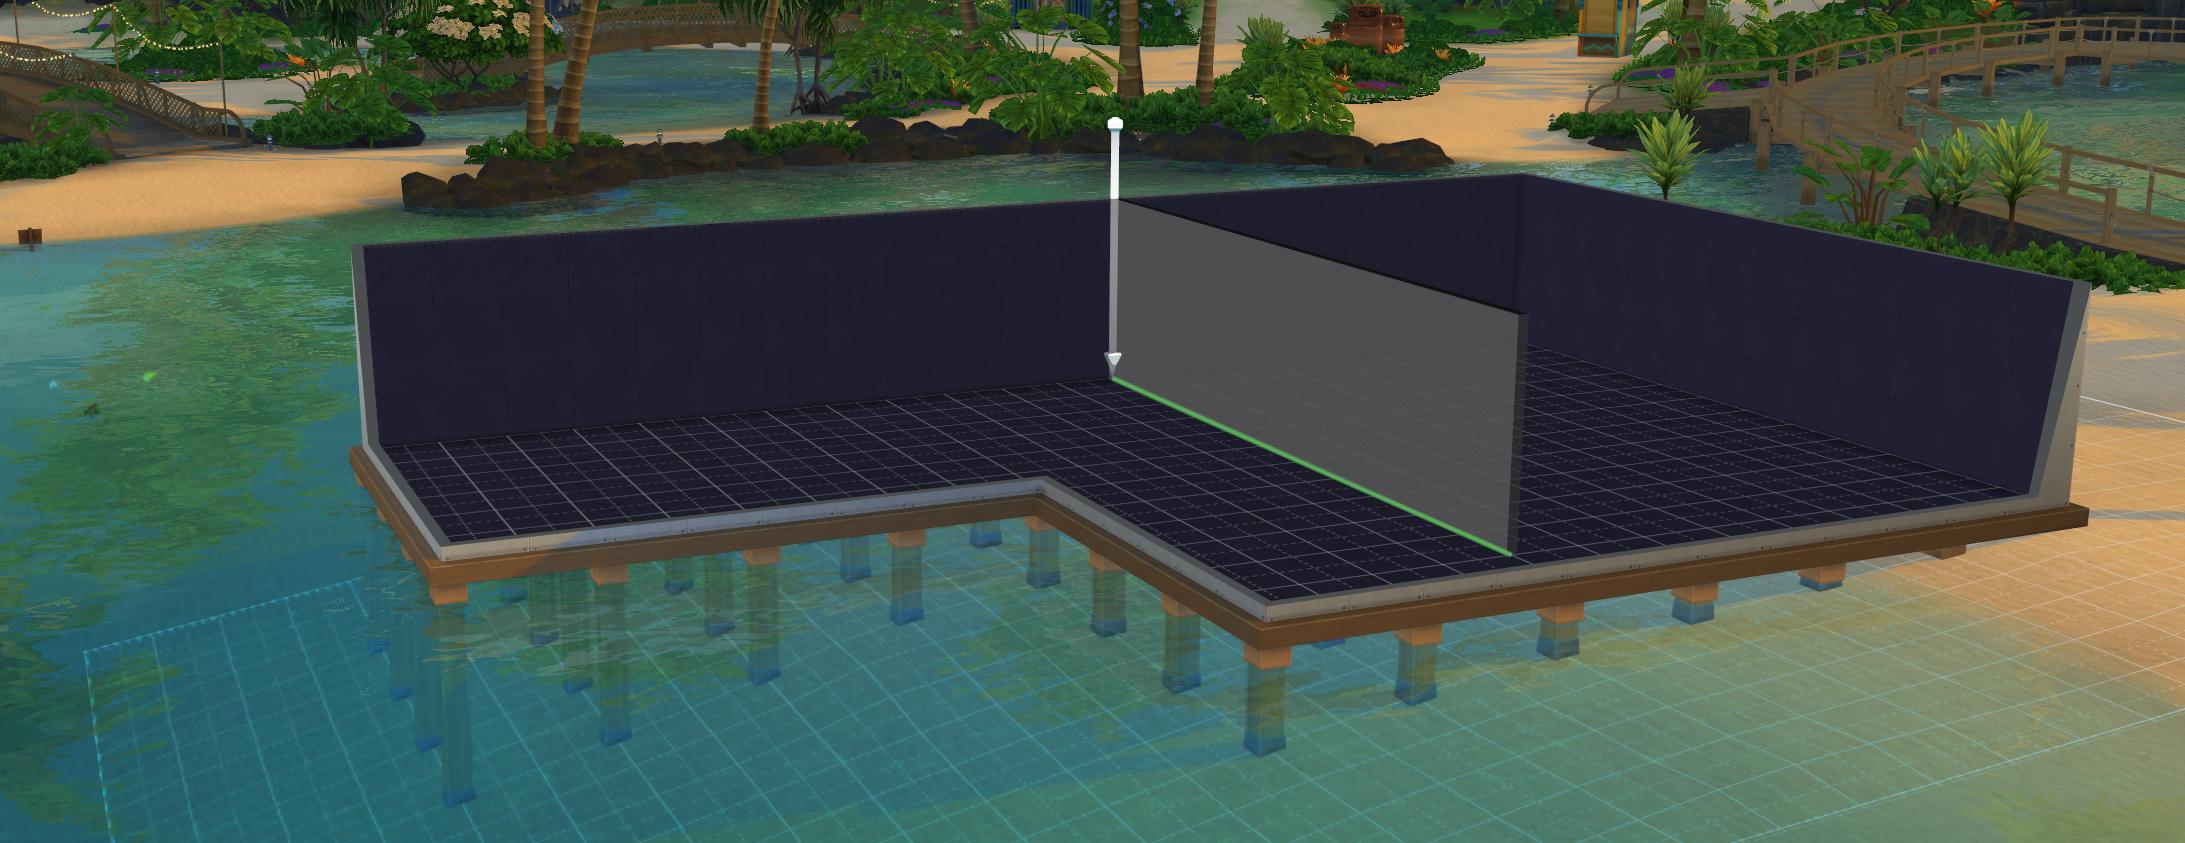 The Sims 4 Island Living: Separate rooms are required for separate foundations on your home build